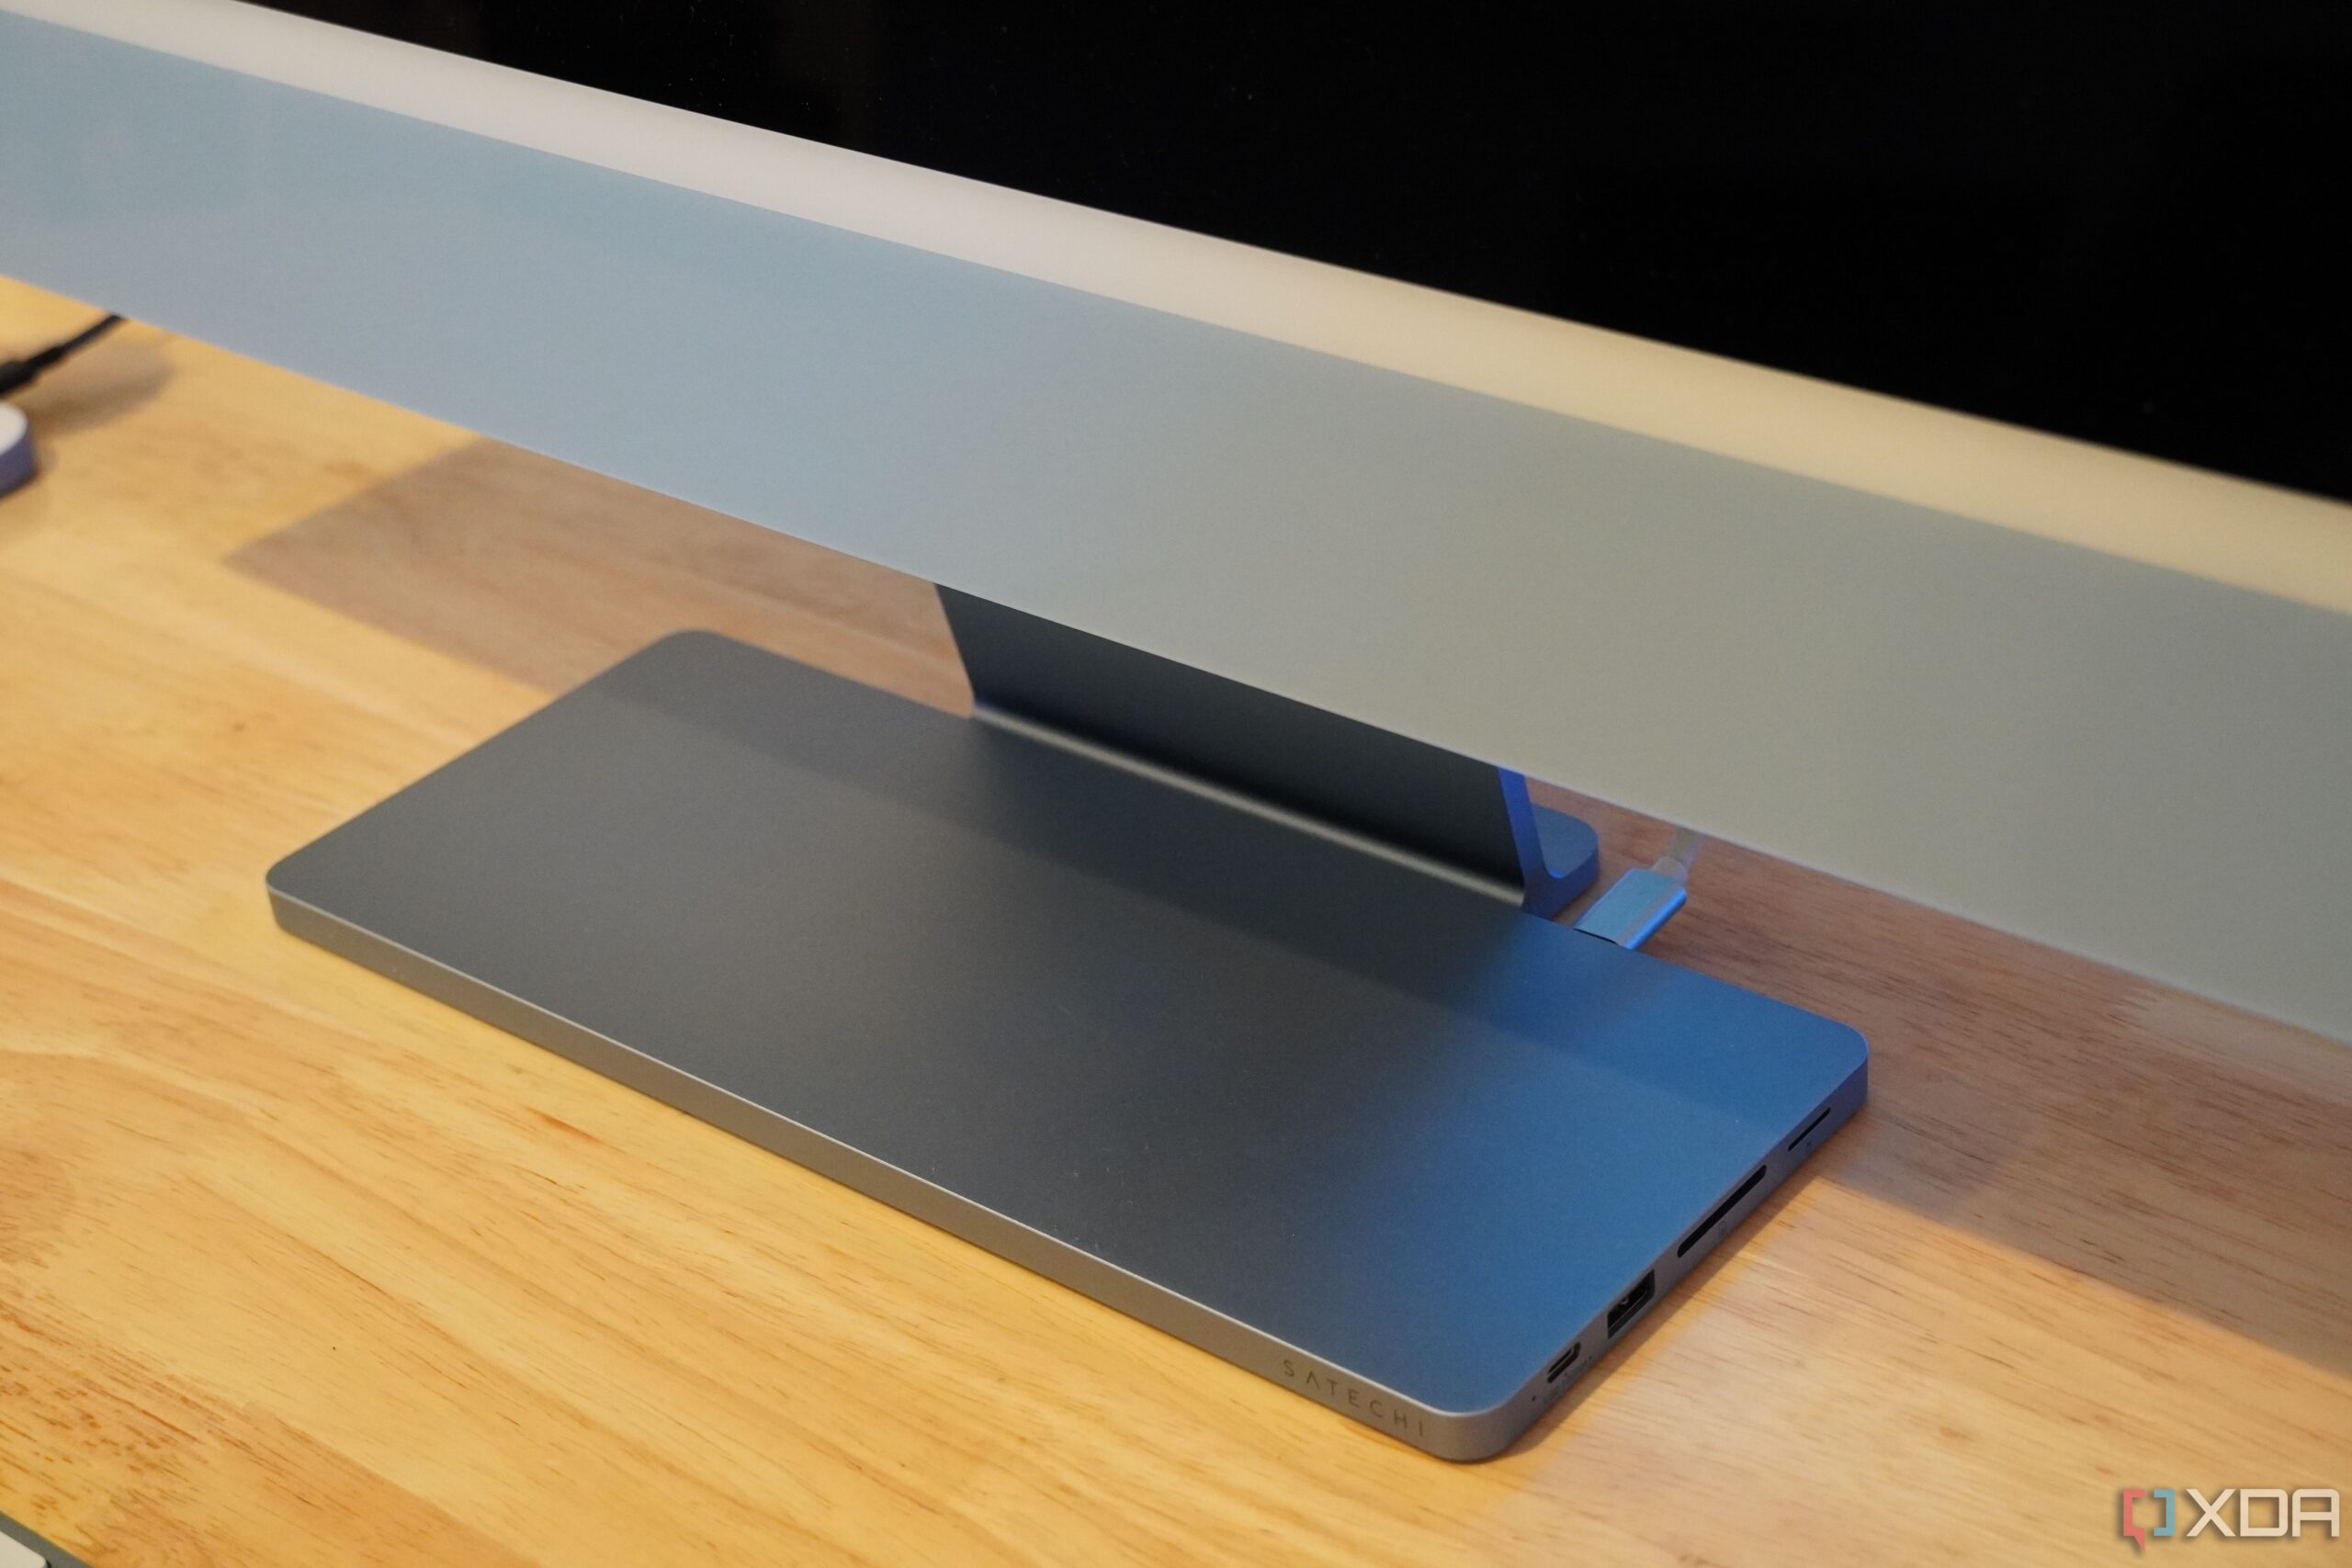 Satechi USB-C Slim Dock for iMac review: A must-have Apple accessory